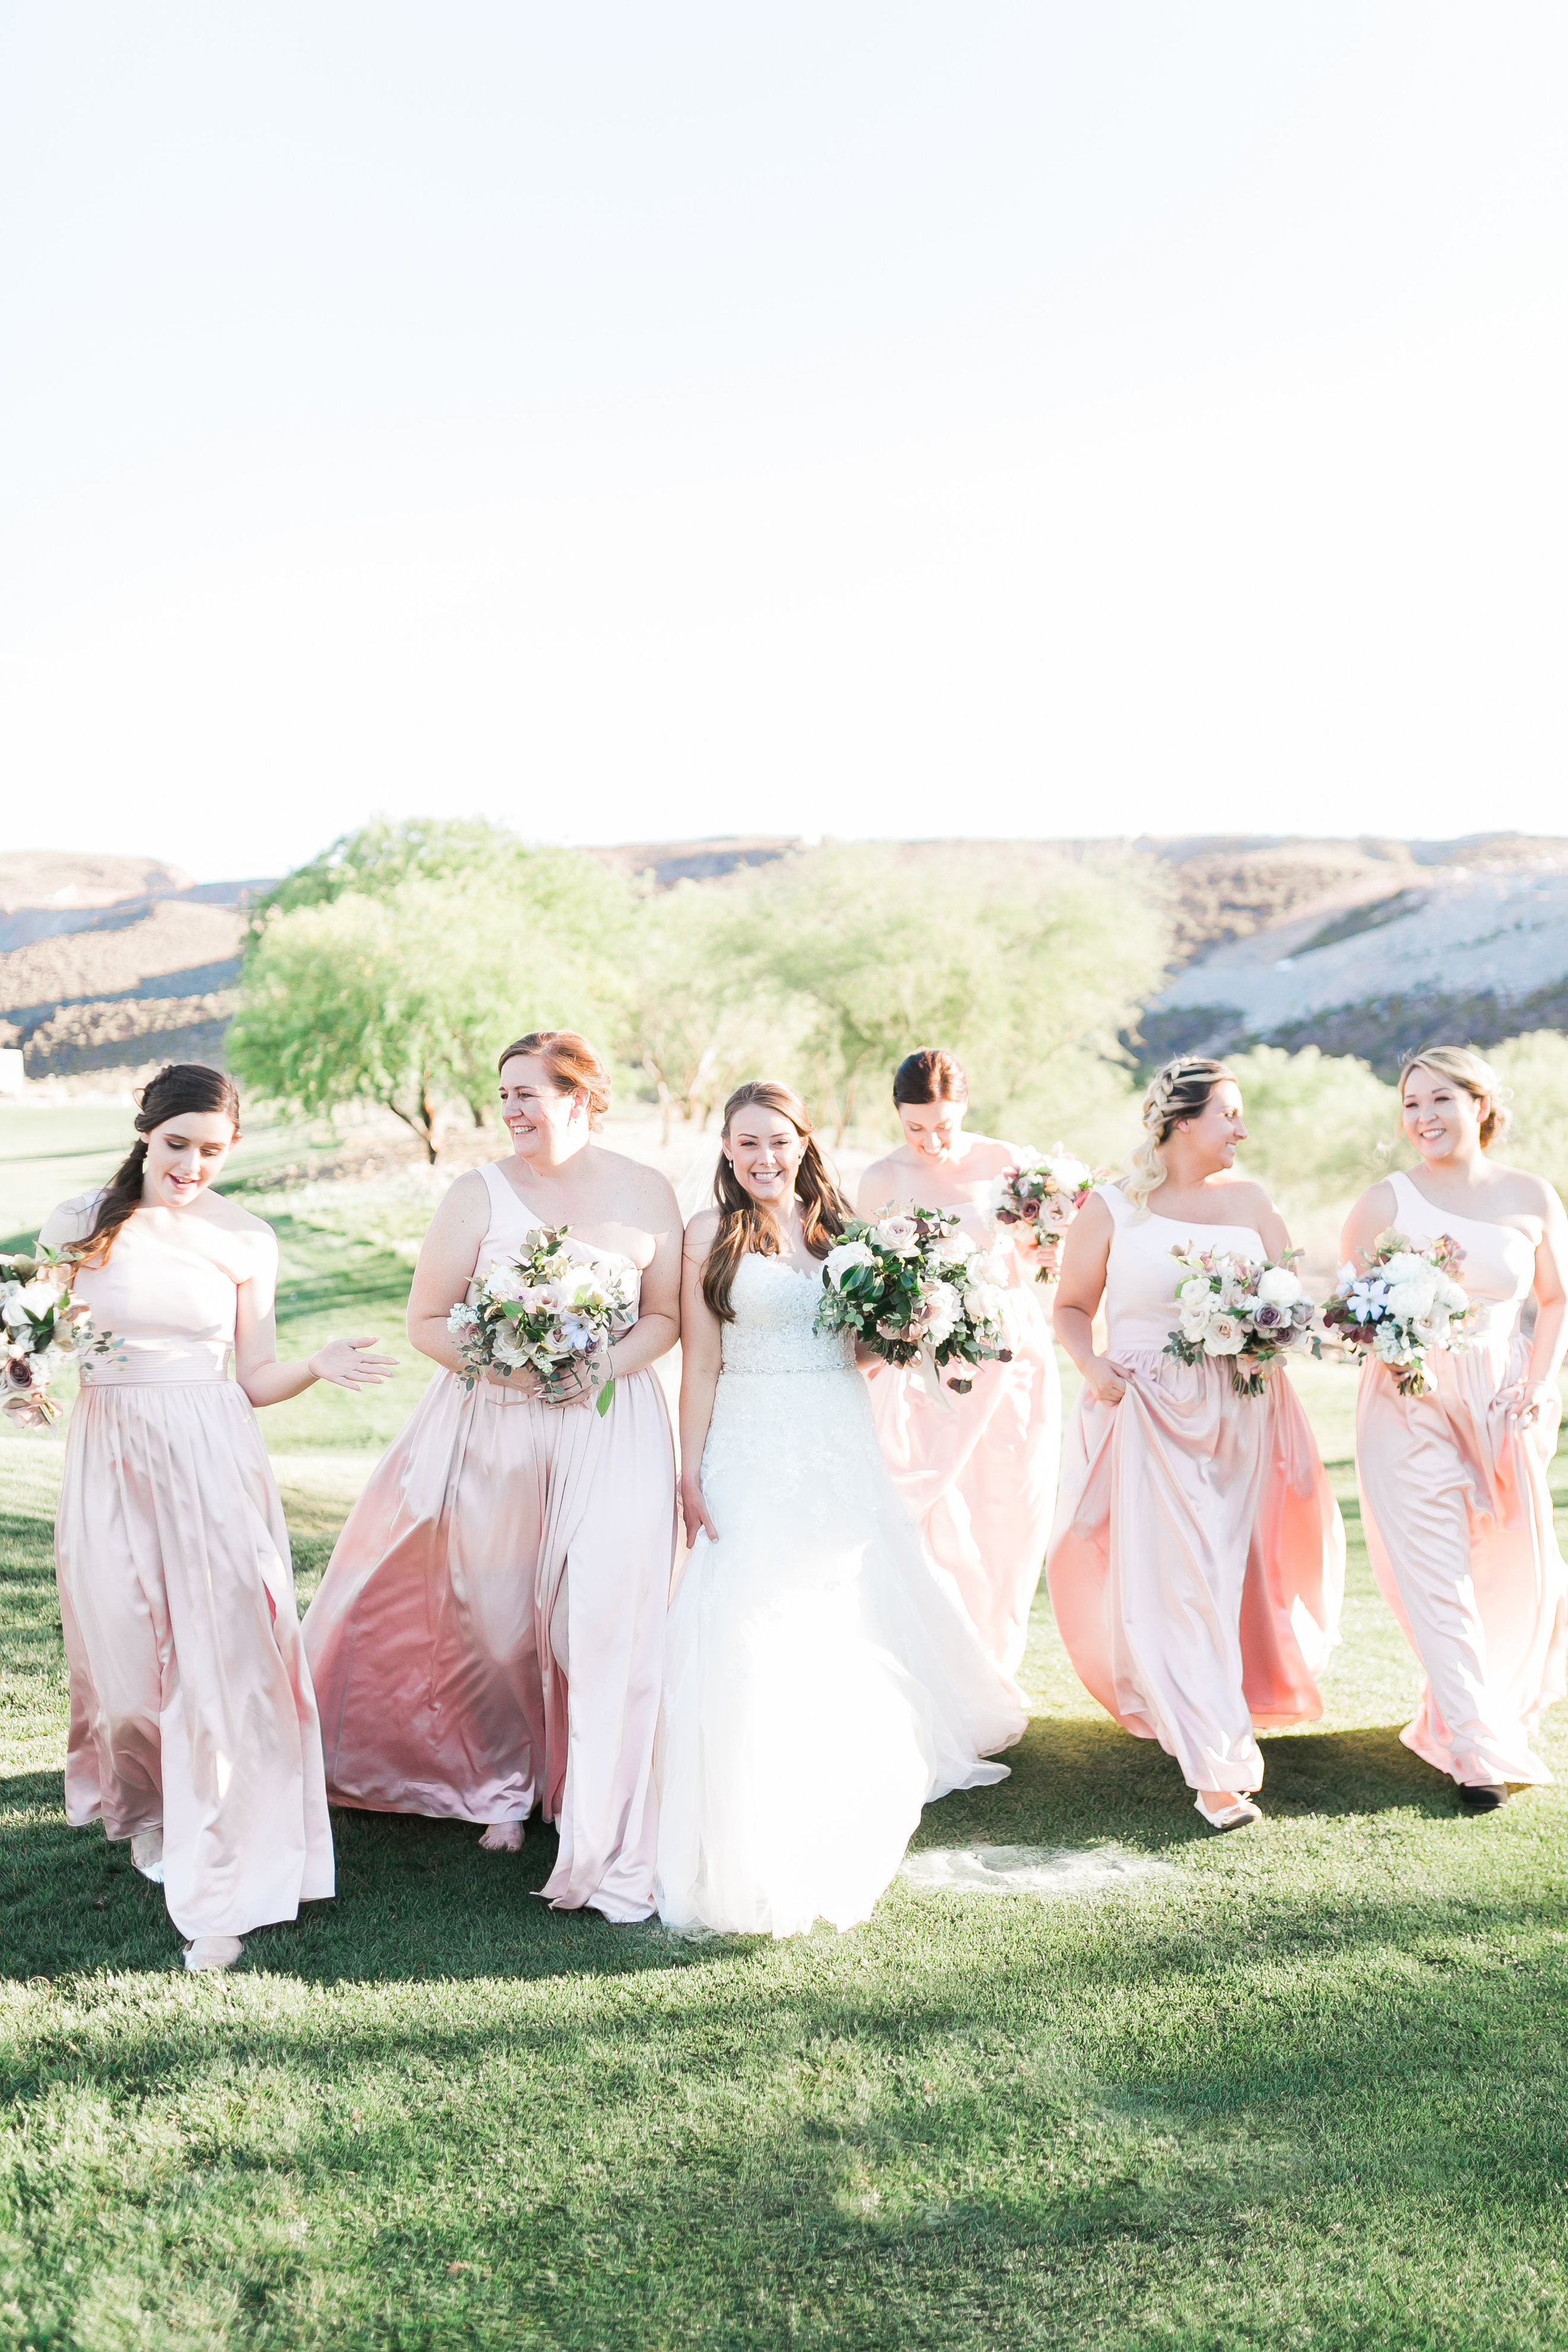 Bridal squad with bridesmaids in blush dresses. 